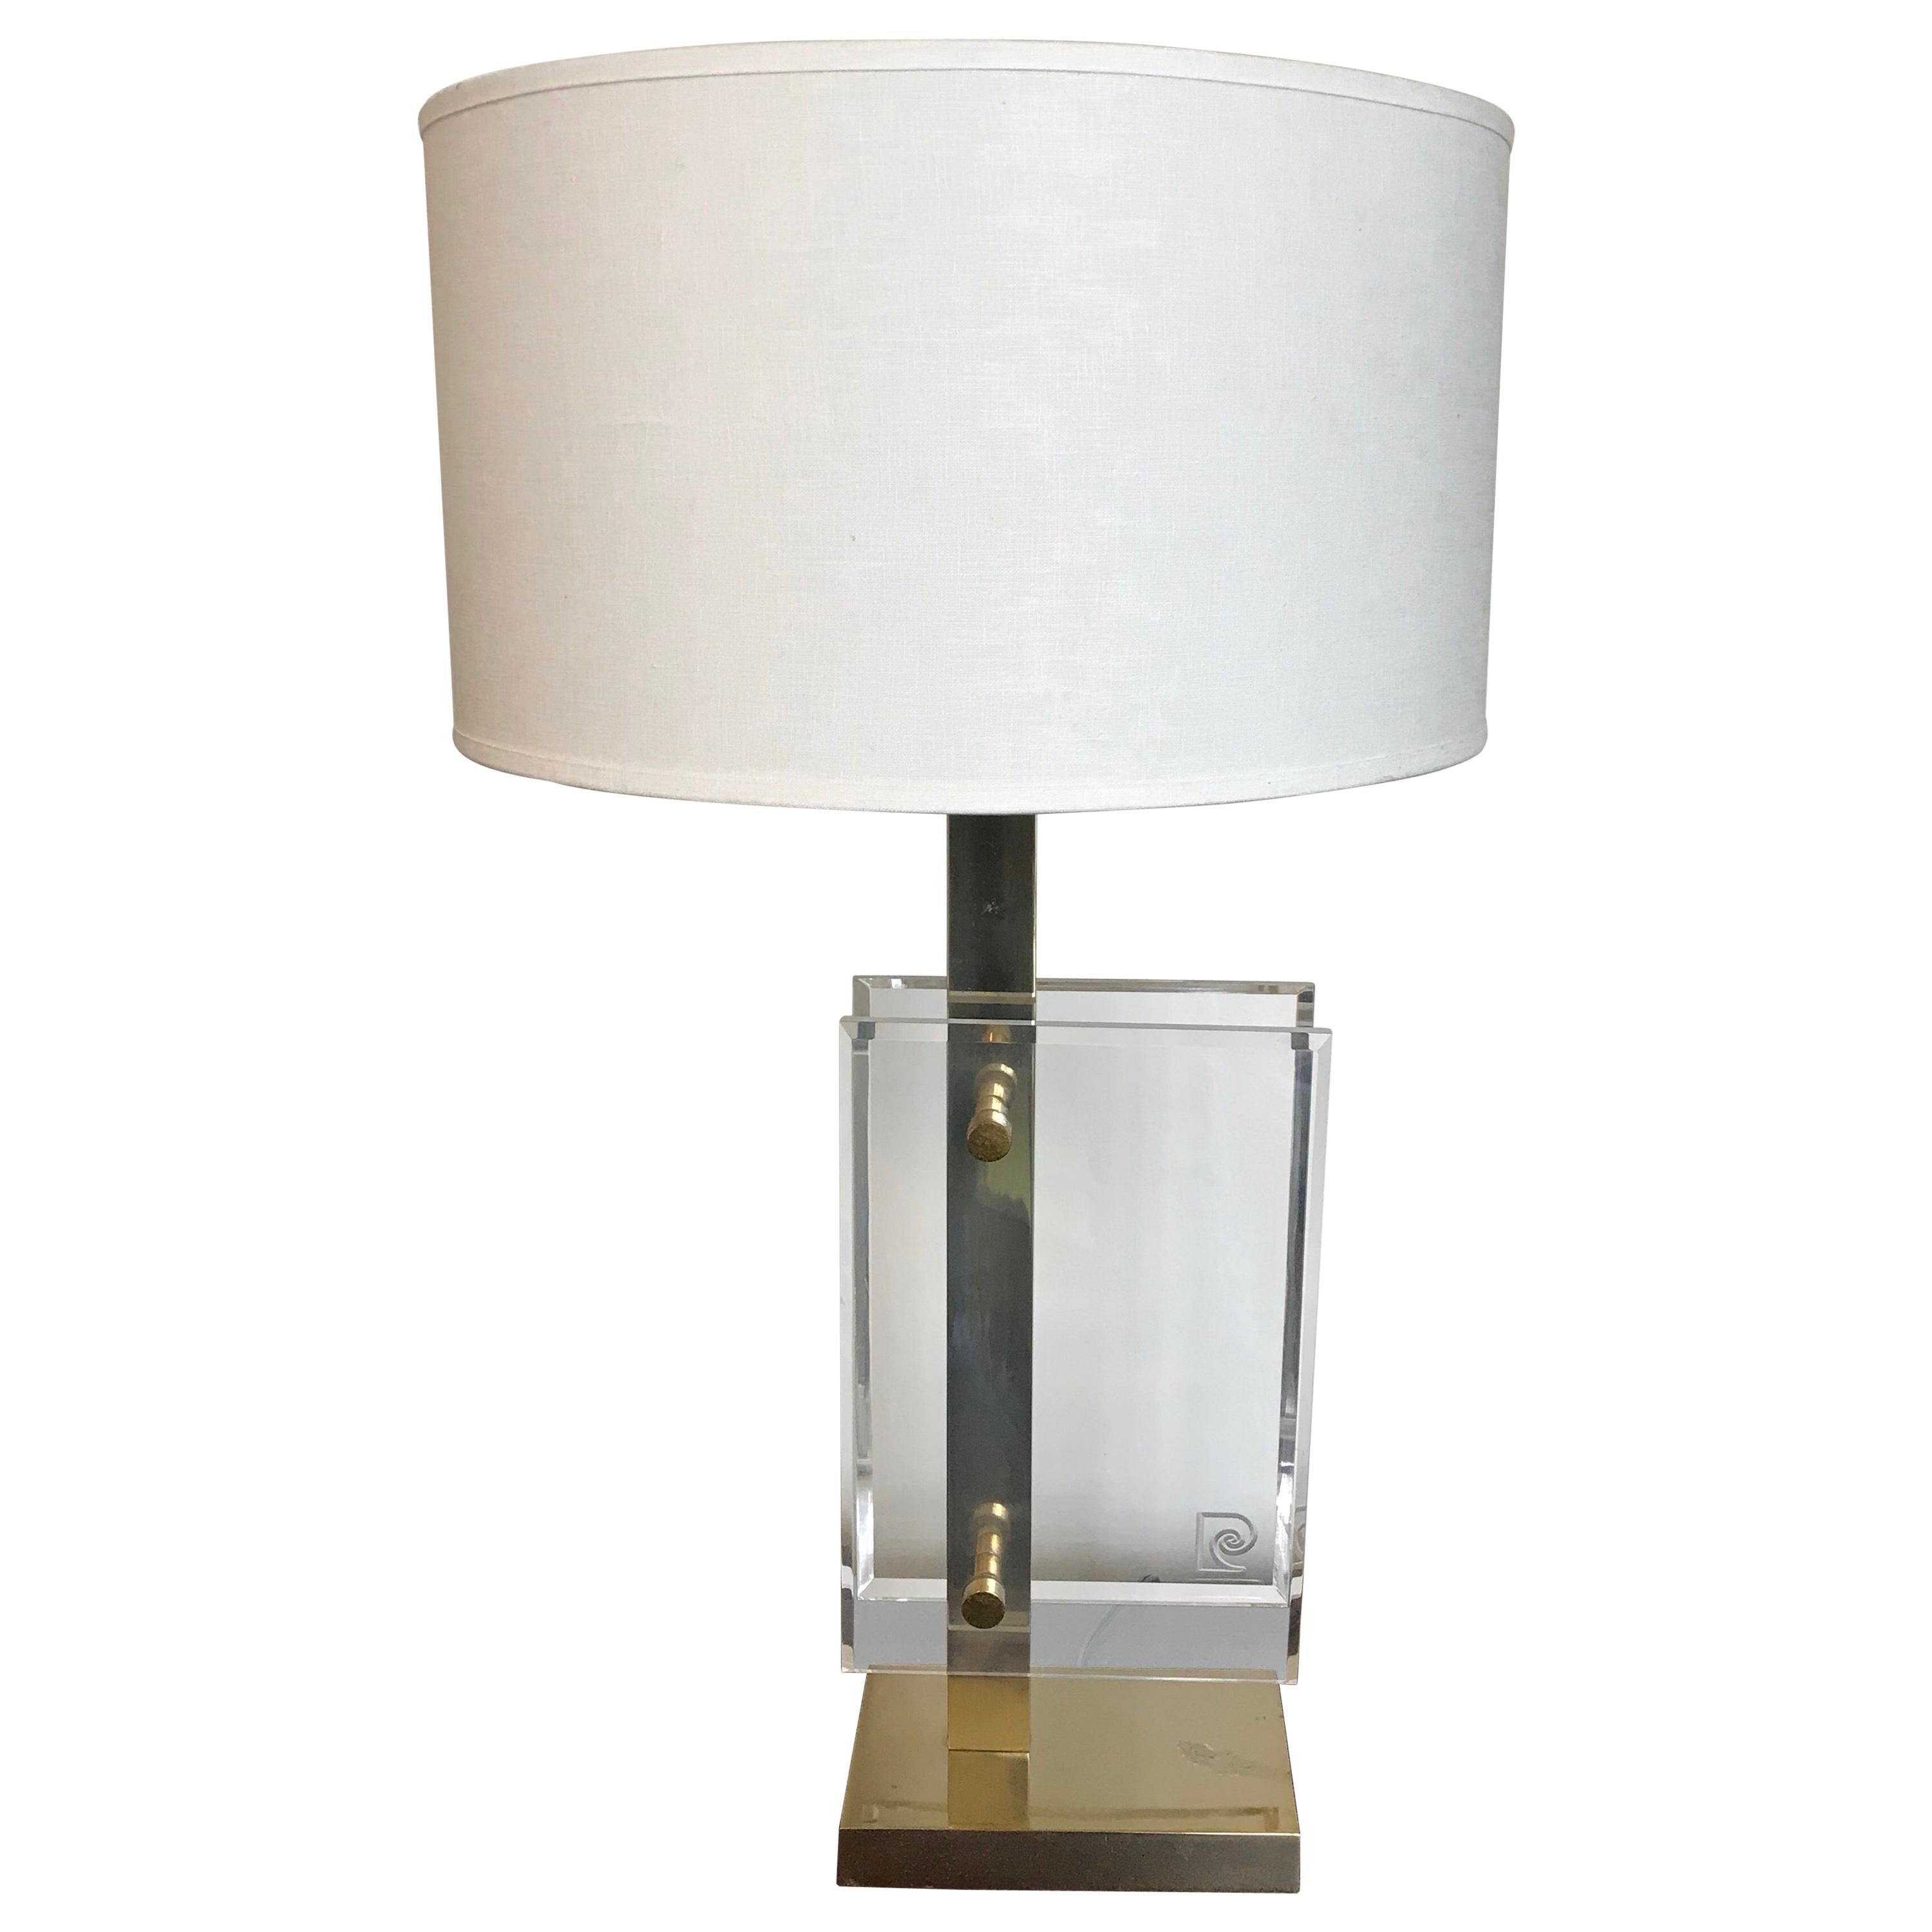 Pierre Cardin Brass and Lucite Table Lamp for Laurel Lamp Company